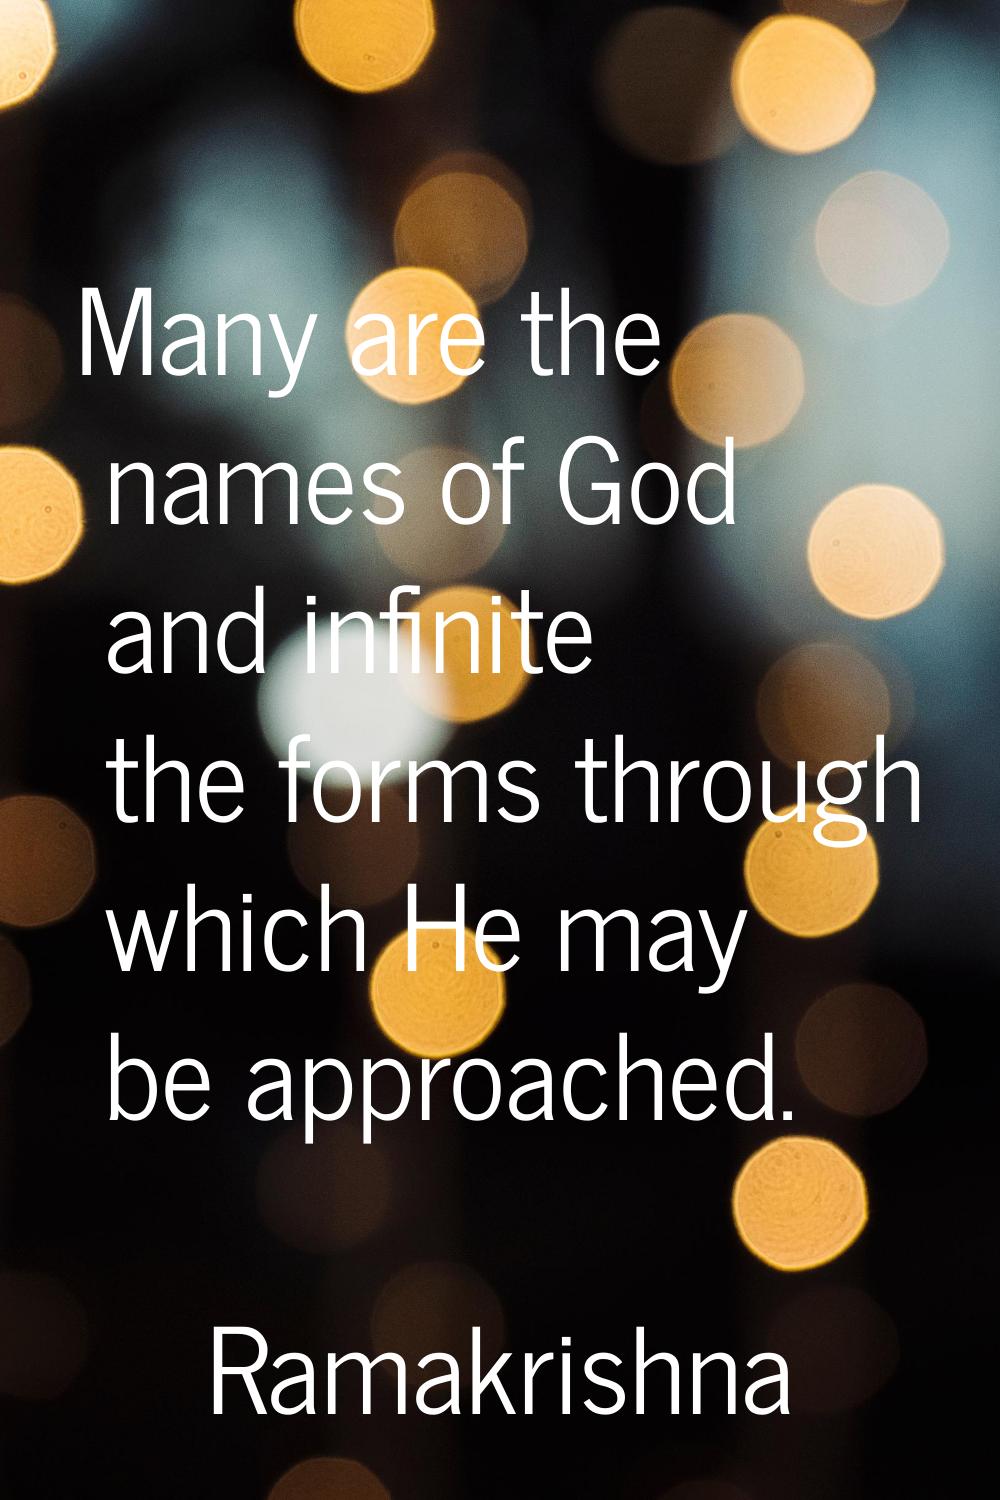 Many are the names of God and infinite the forms through which He may be approached.